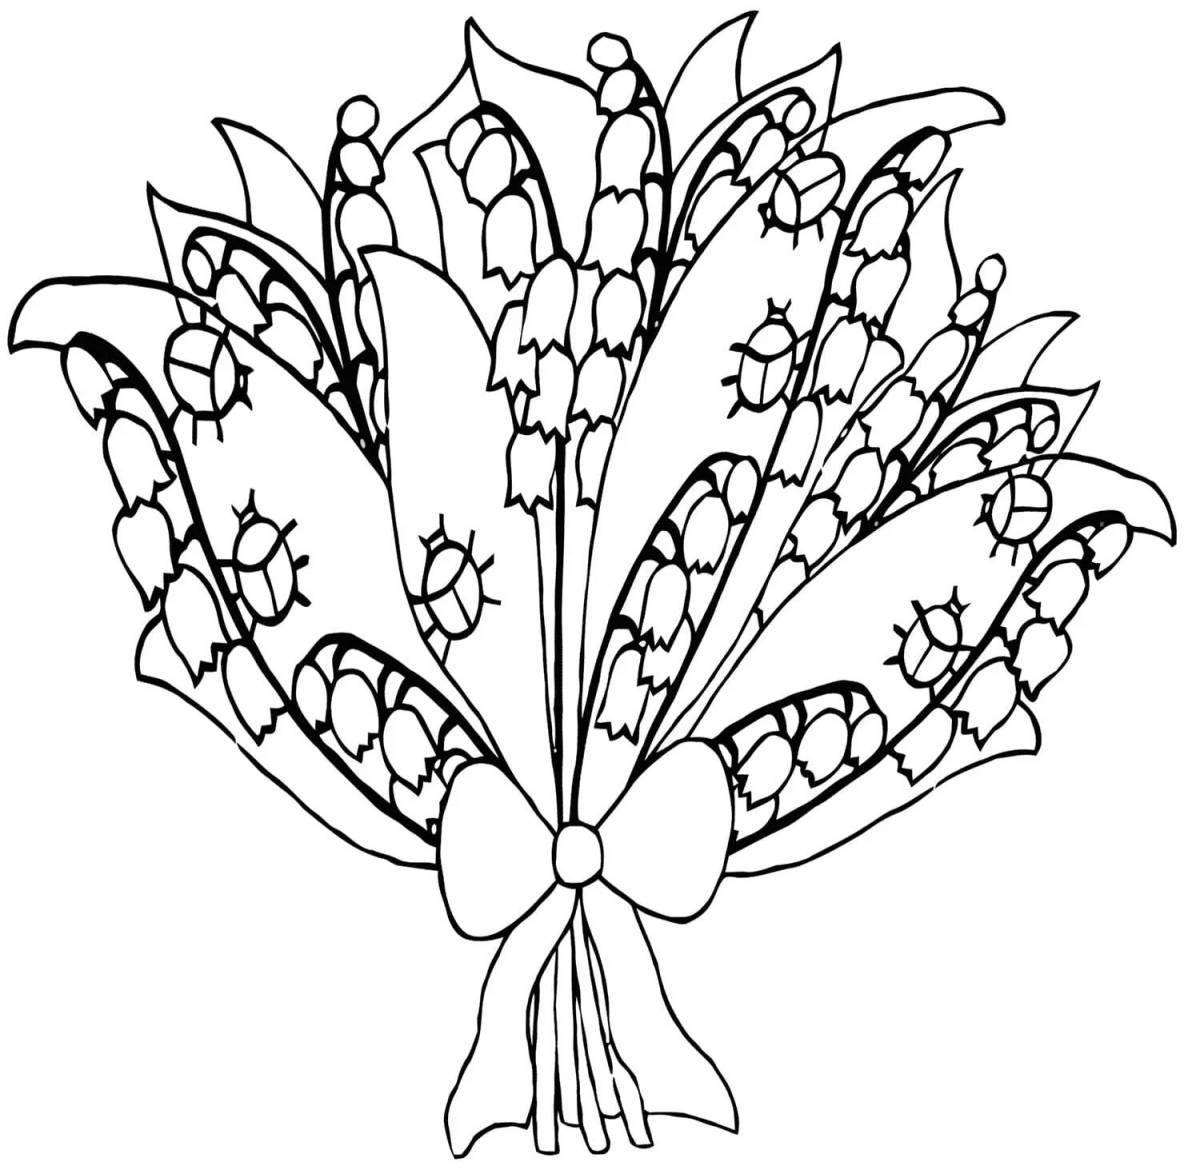 Serene lily of the valley coloring book for kids